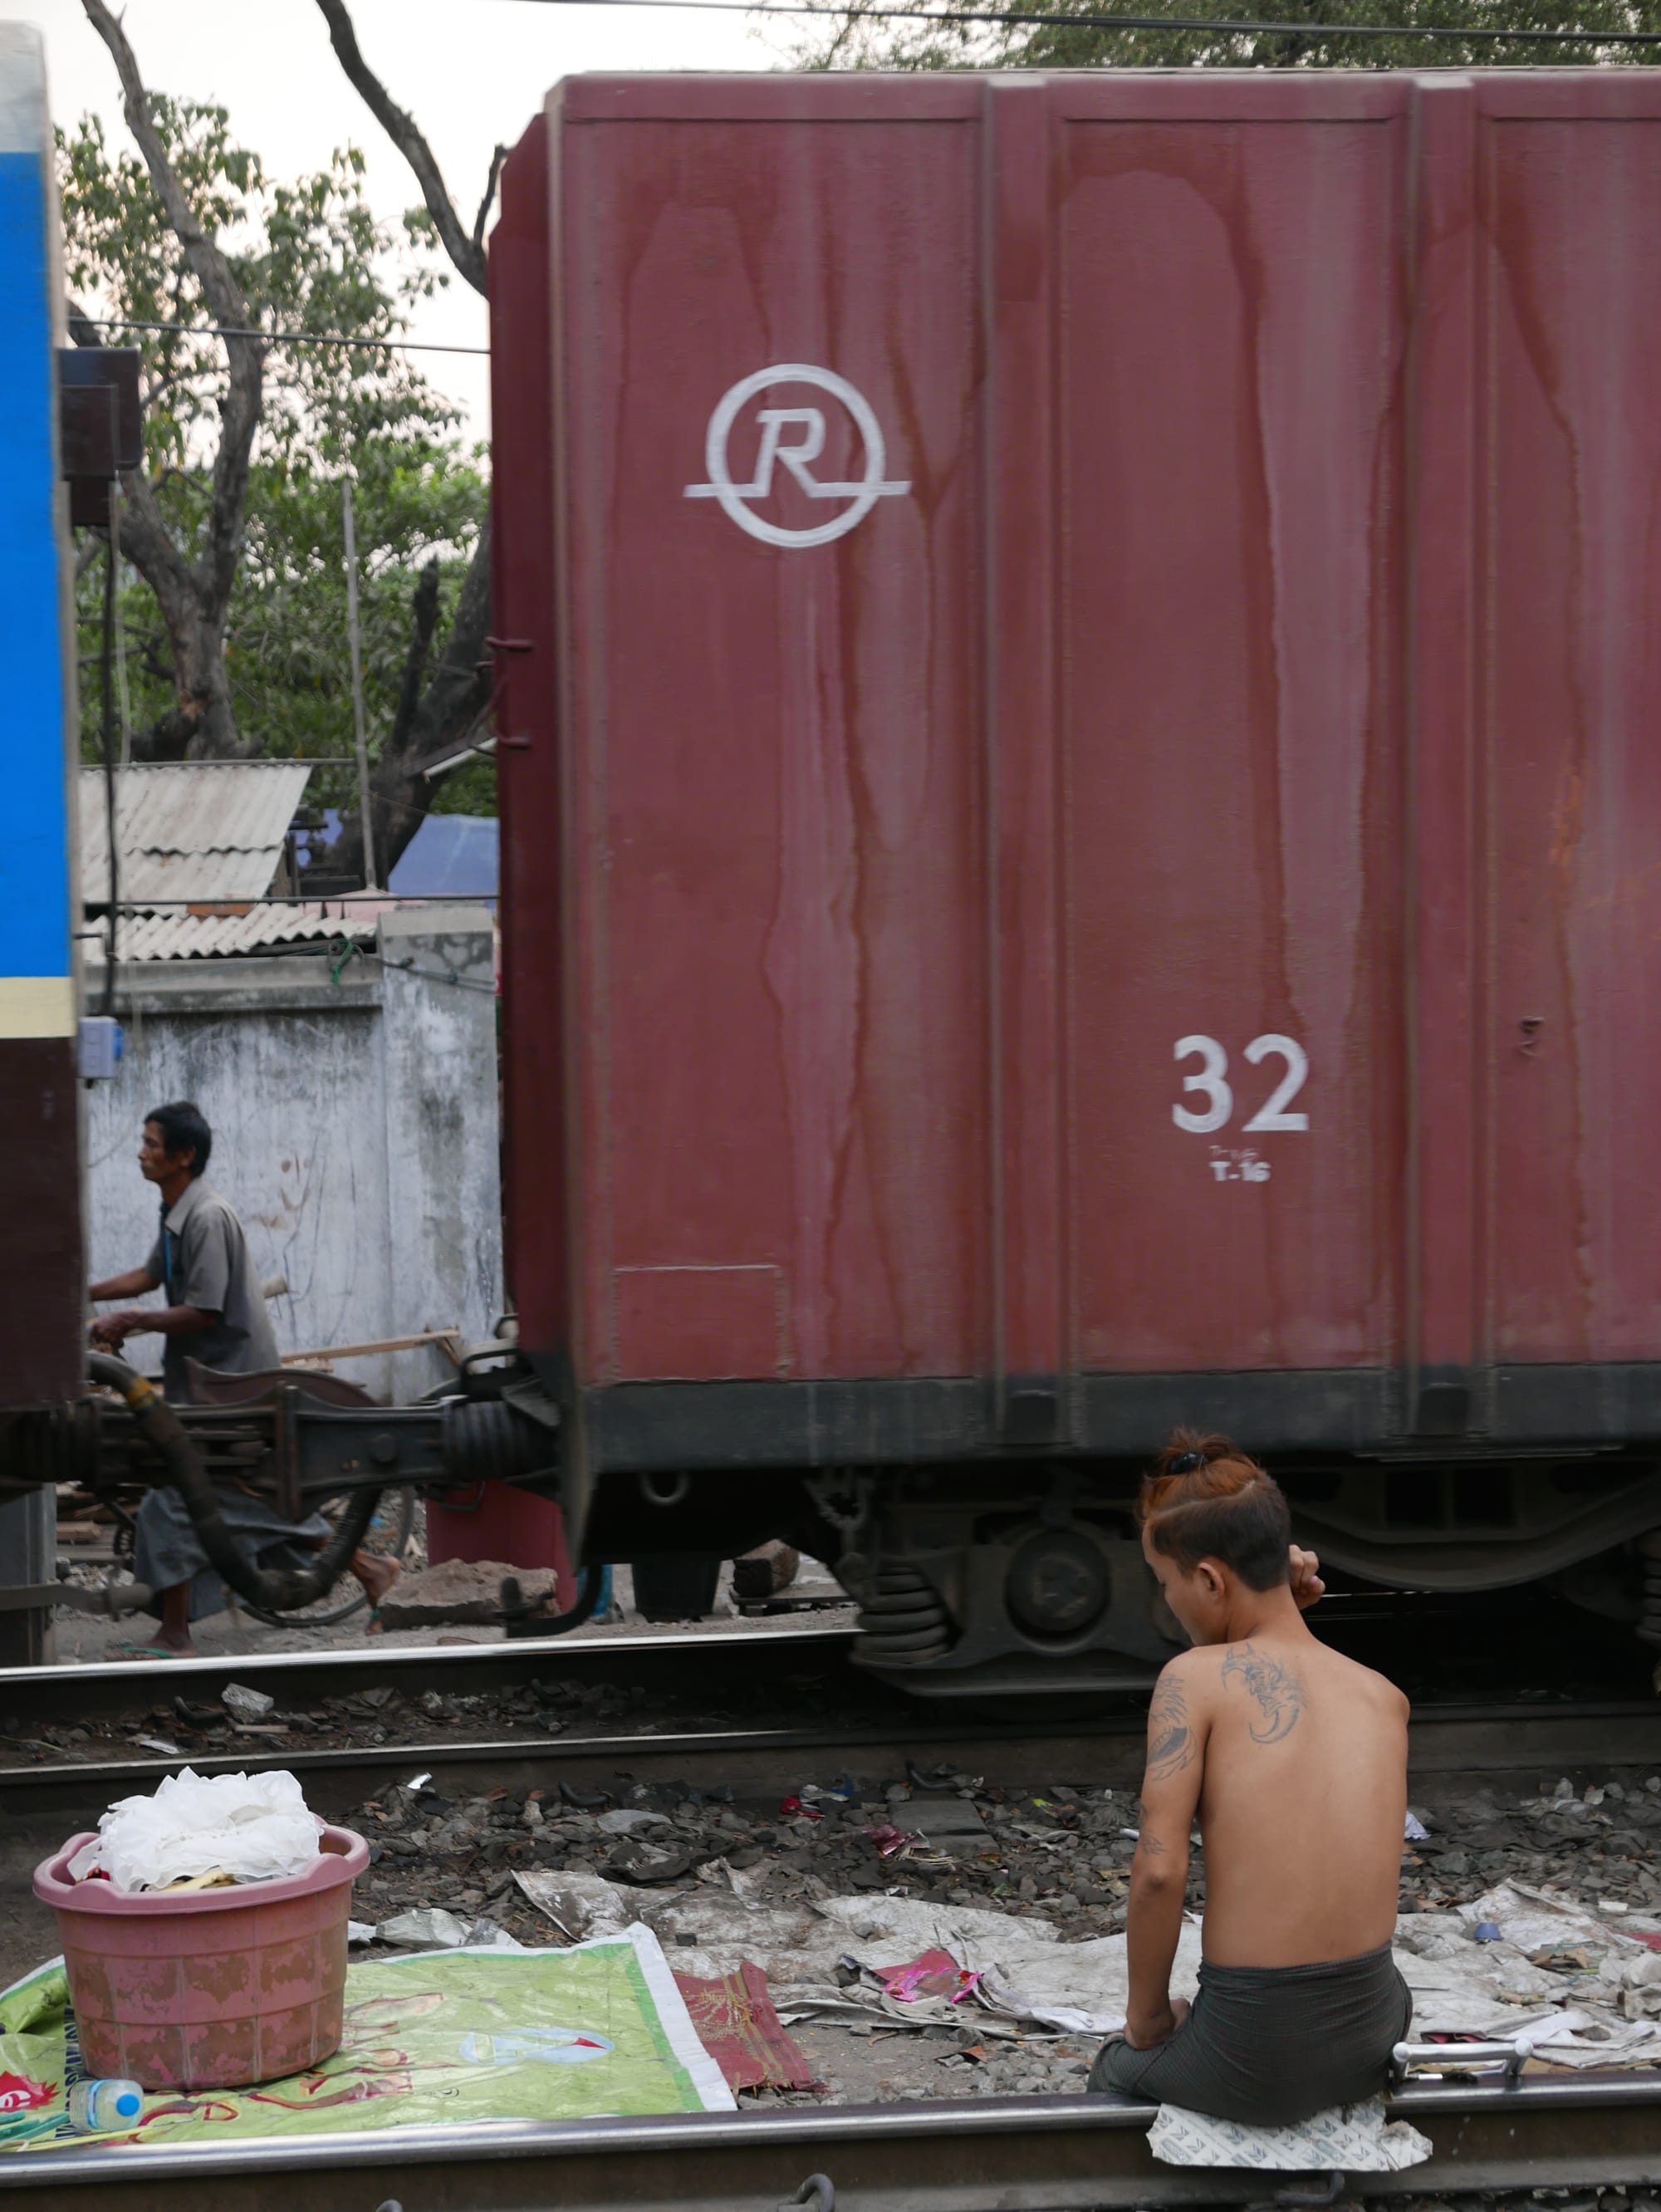 Photo by Author — local train tracks in Mandalay